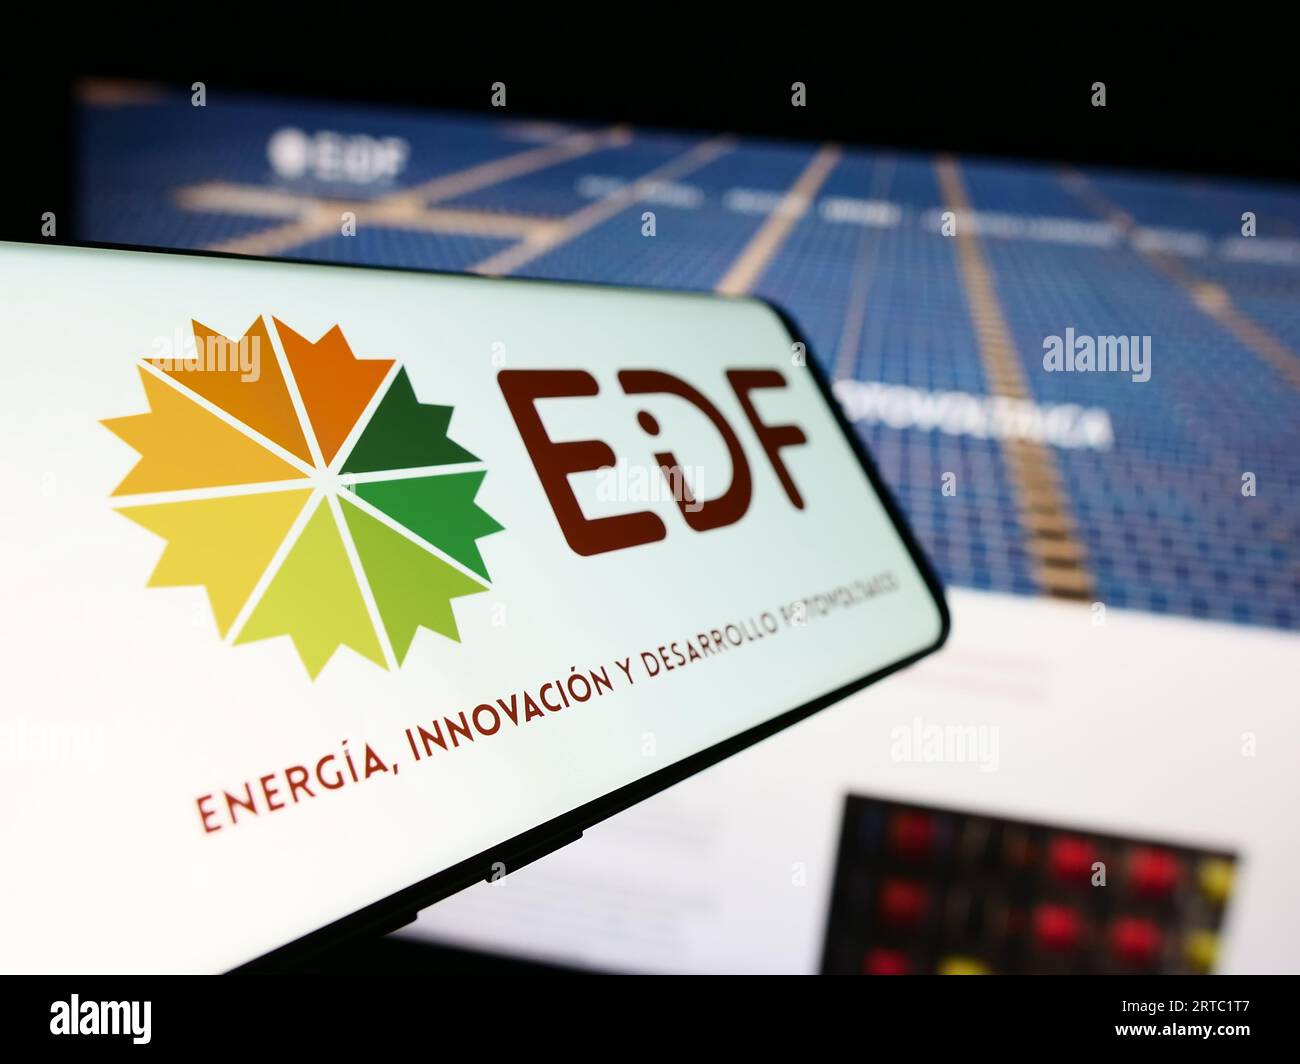 Mobile phone with logo of Spanish photovoltaics company EiDF Solar on screen in front of business website. Focus on center-left of phone display. Stock Photo